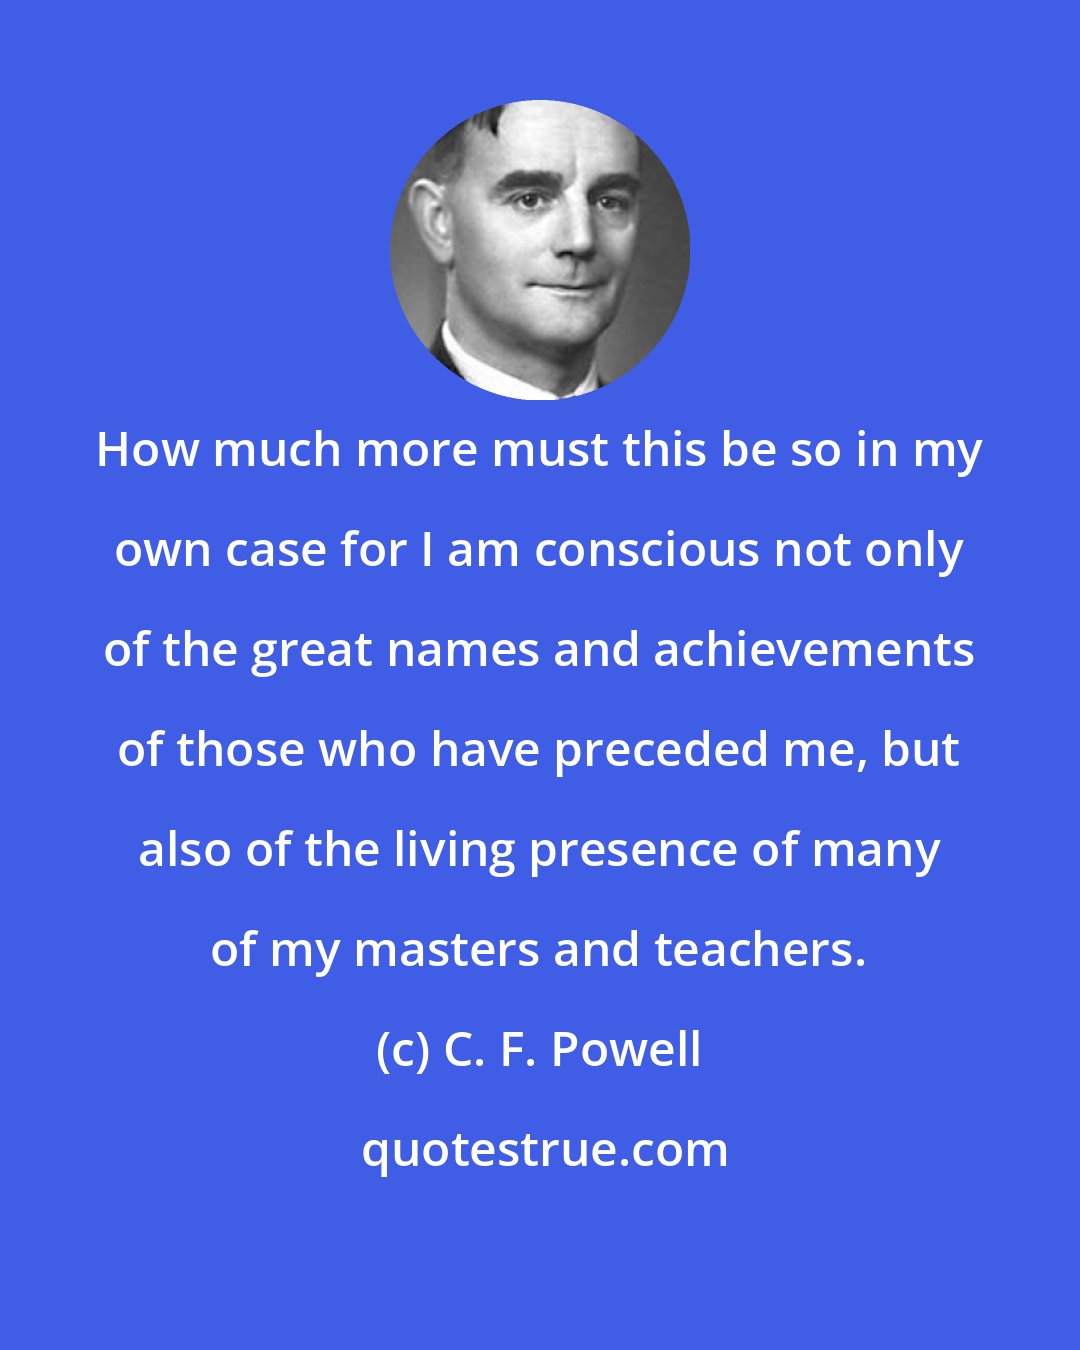 C. F. Powell: How much more must this be so in my own case for I am conscious not only of the great names and achievements of those who have preceded me, but also of the living presence of many of my masters and teachers.